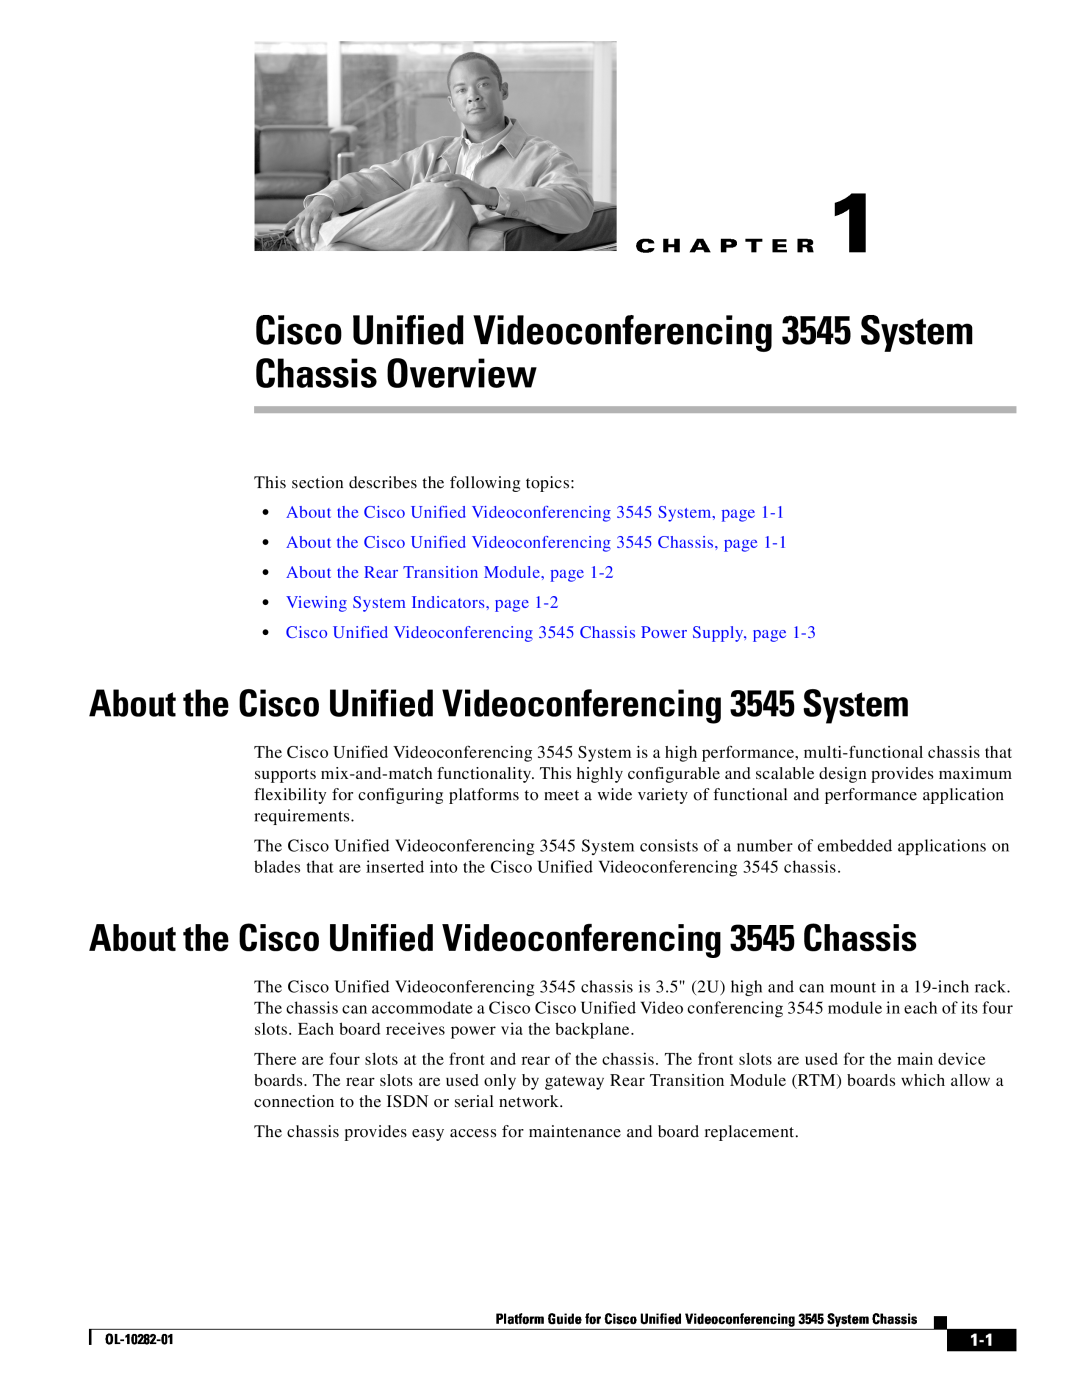 Cisco Systems OL-10282-01 manual Cisco Unified Videoconferencing 3545 System Chassis Overview, C H A P T E R 